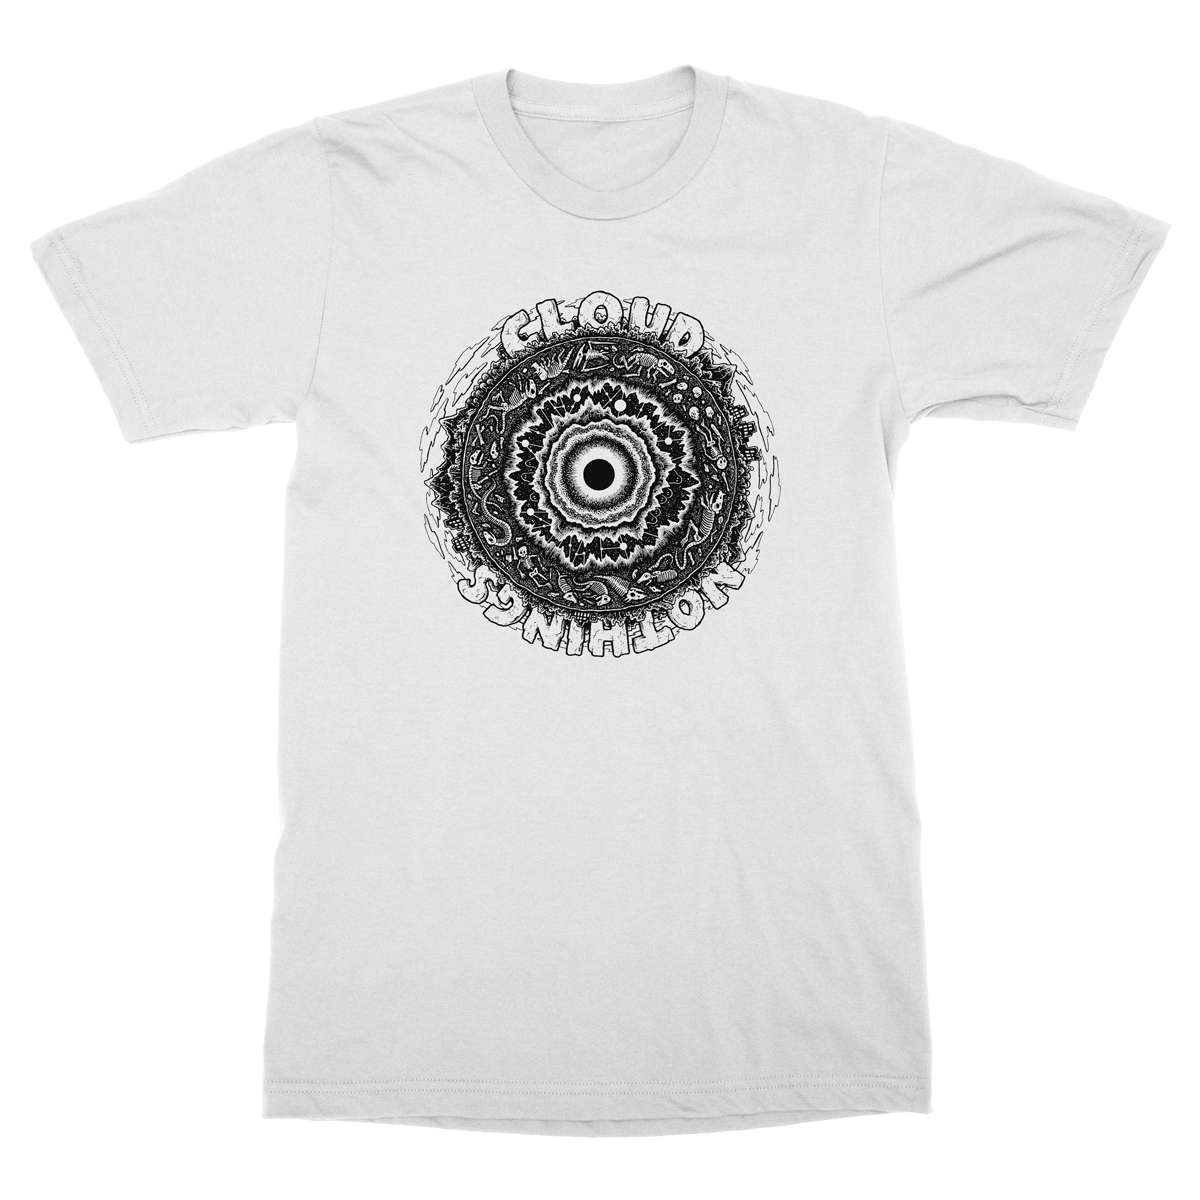 Cloud Nothings Fossils T-shirt